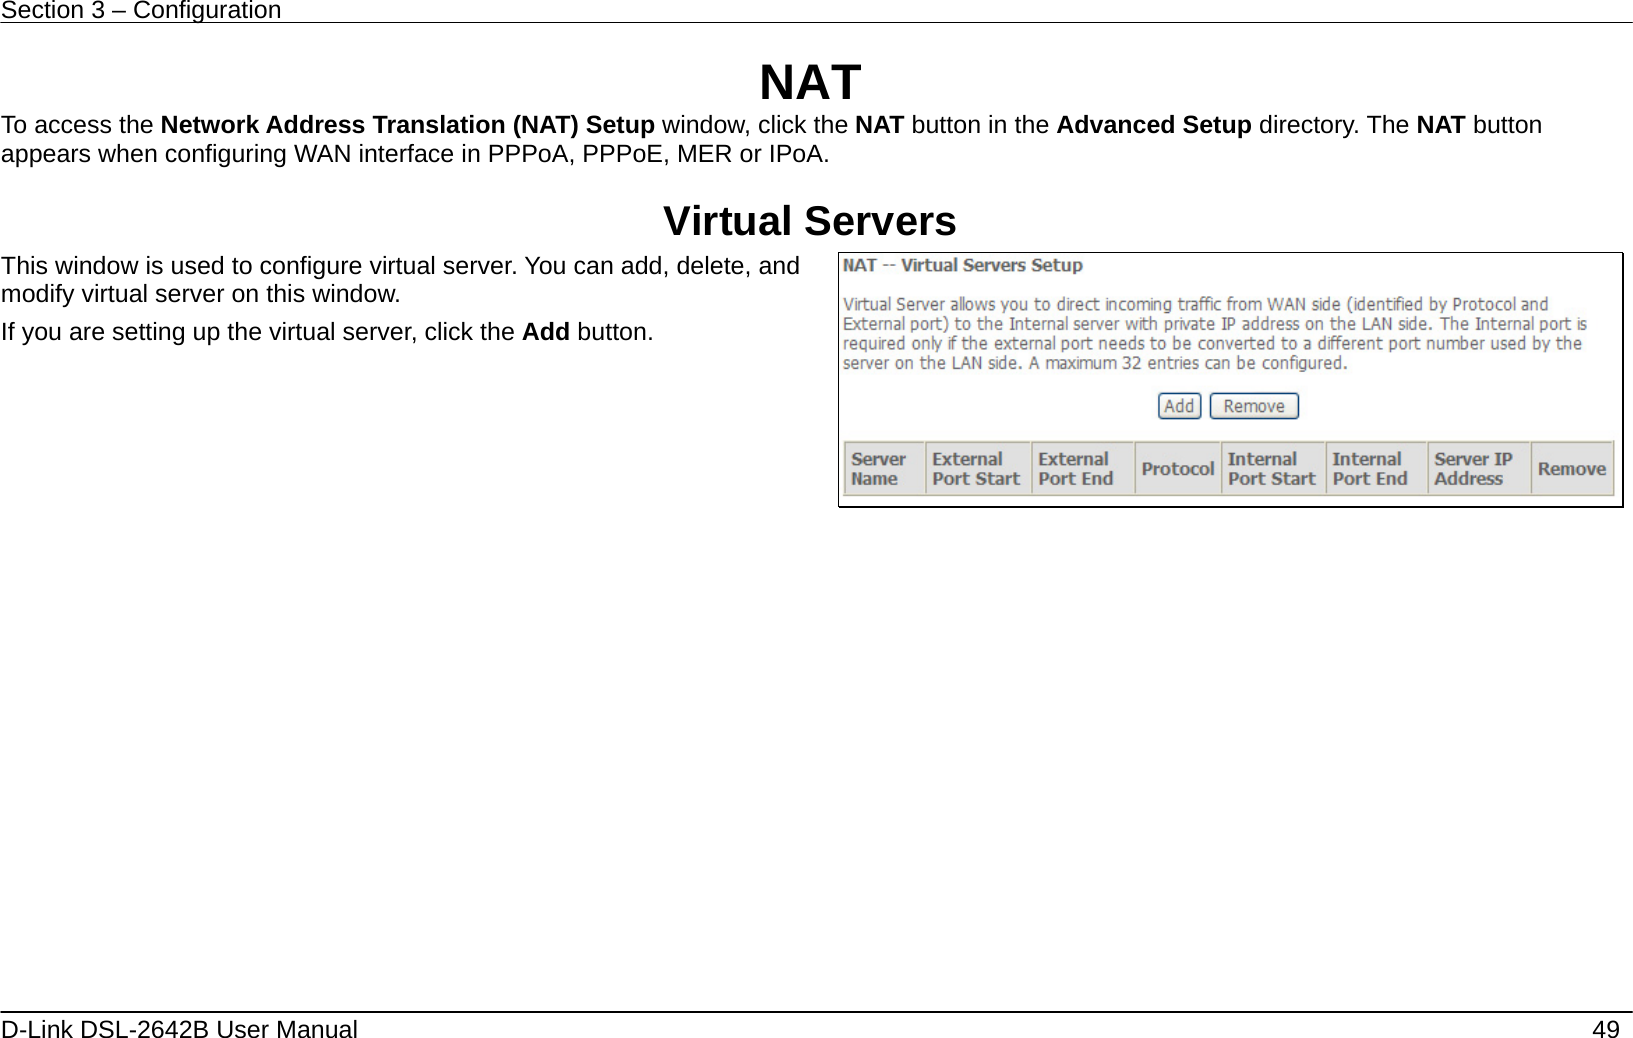 Section 3 – Configuration   D-Link DSL-2642B User Manual    49 NAT To access the Network Address Translation (NAT) Setup window, click the NAT button in the Advanced Setup directory. The NAT button appears when configuring WAN interface in PPPoA, PPPoE, MER or IPoA.  Virtual Servers This window is used to configure virtual server. You can add, delete, and modify virtual server on this window.   If you are setting up the virtual server, click the Add button.         